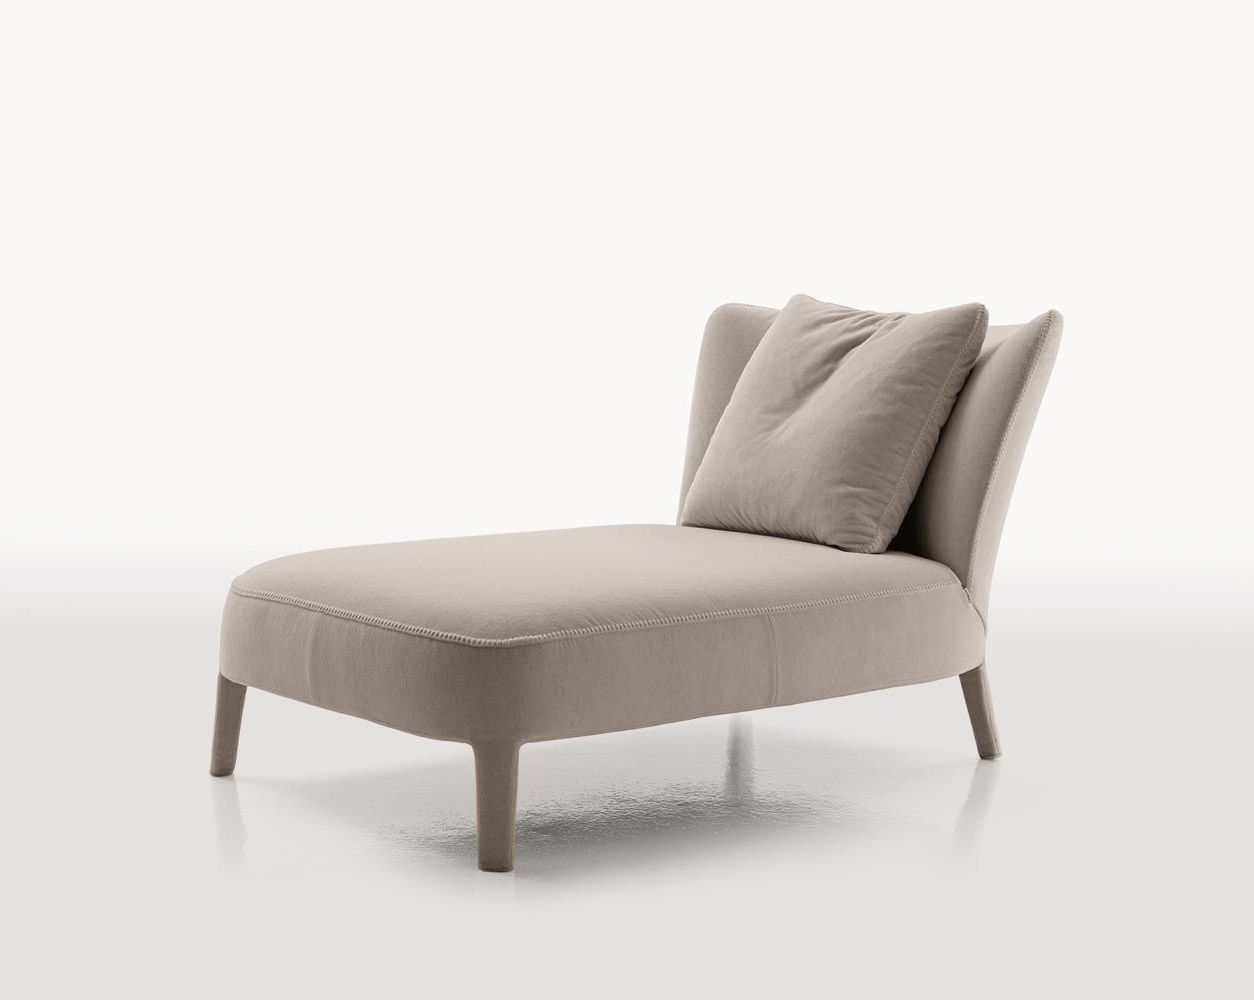 Small Chaise Lounges With Regard To Recent Small Chaise Lounge Chairs For Bedroom • Lounge Chairs Ideas (View 2 of 15)